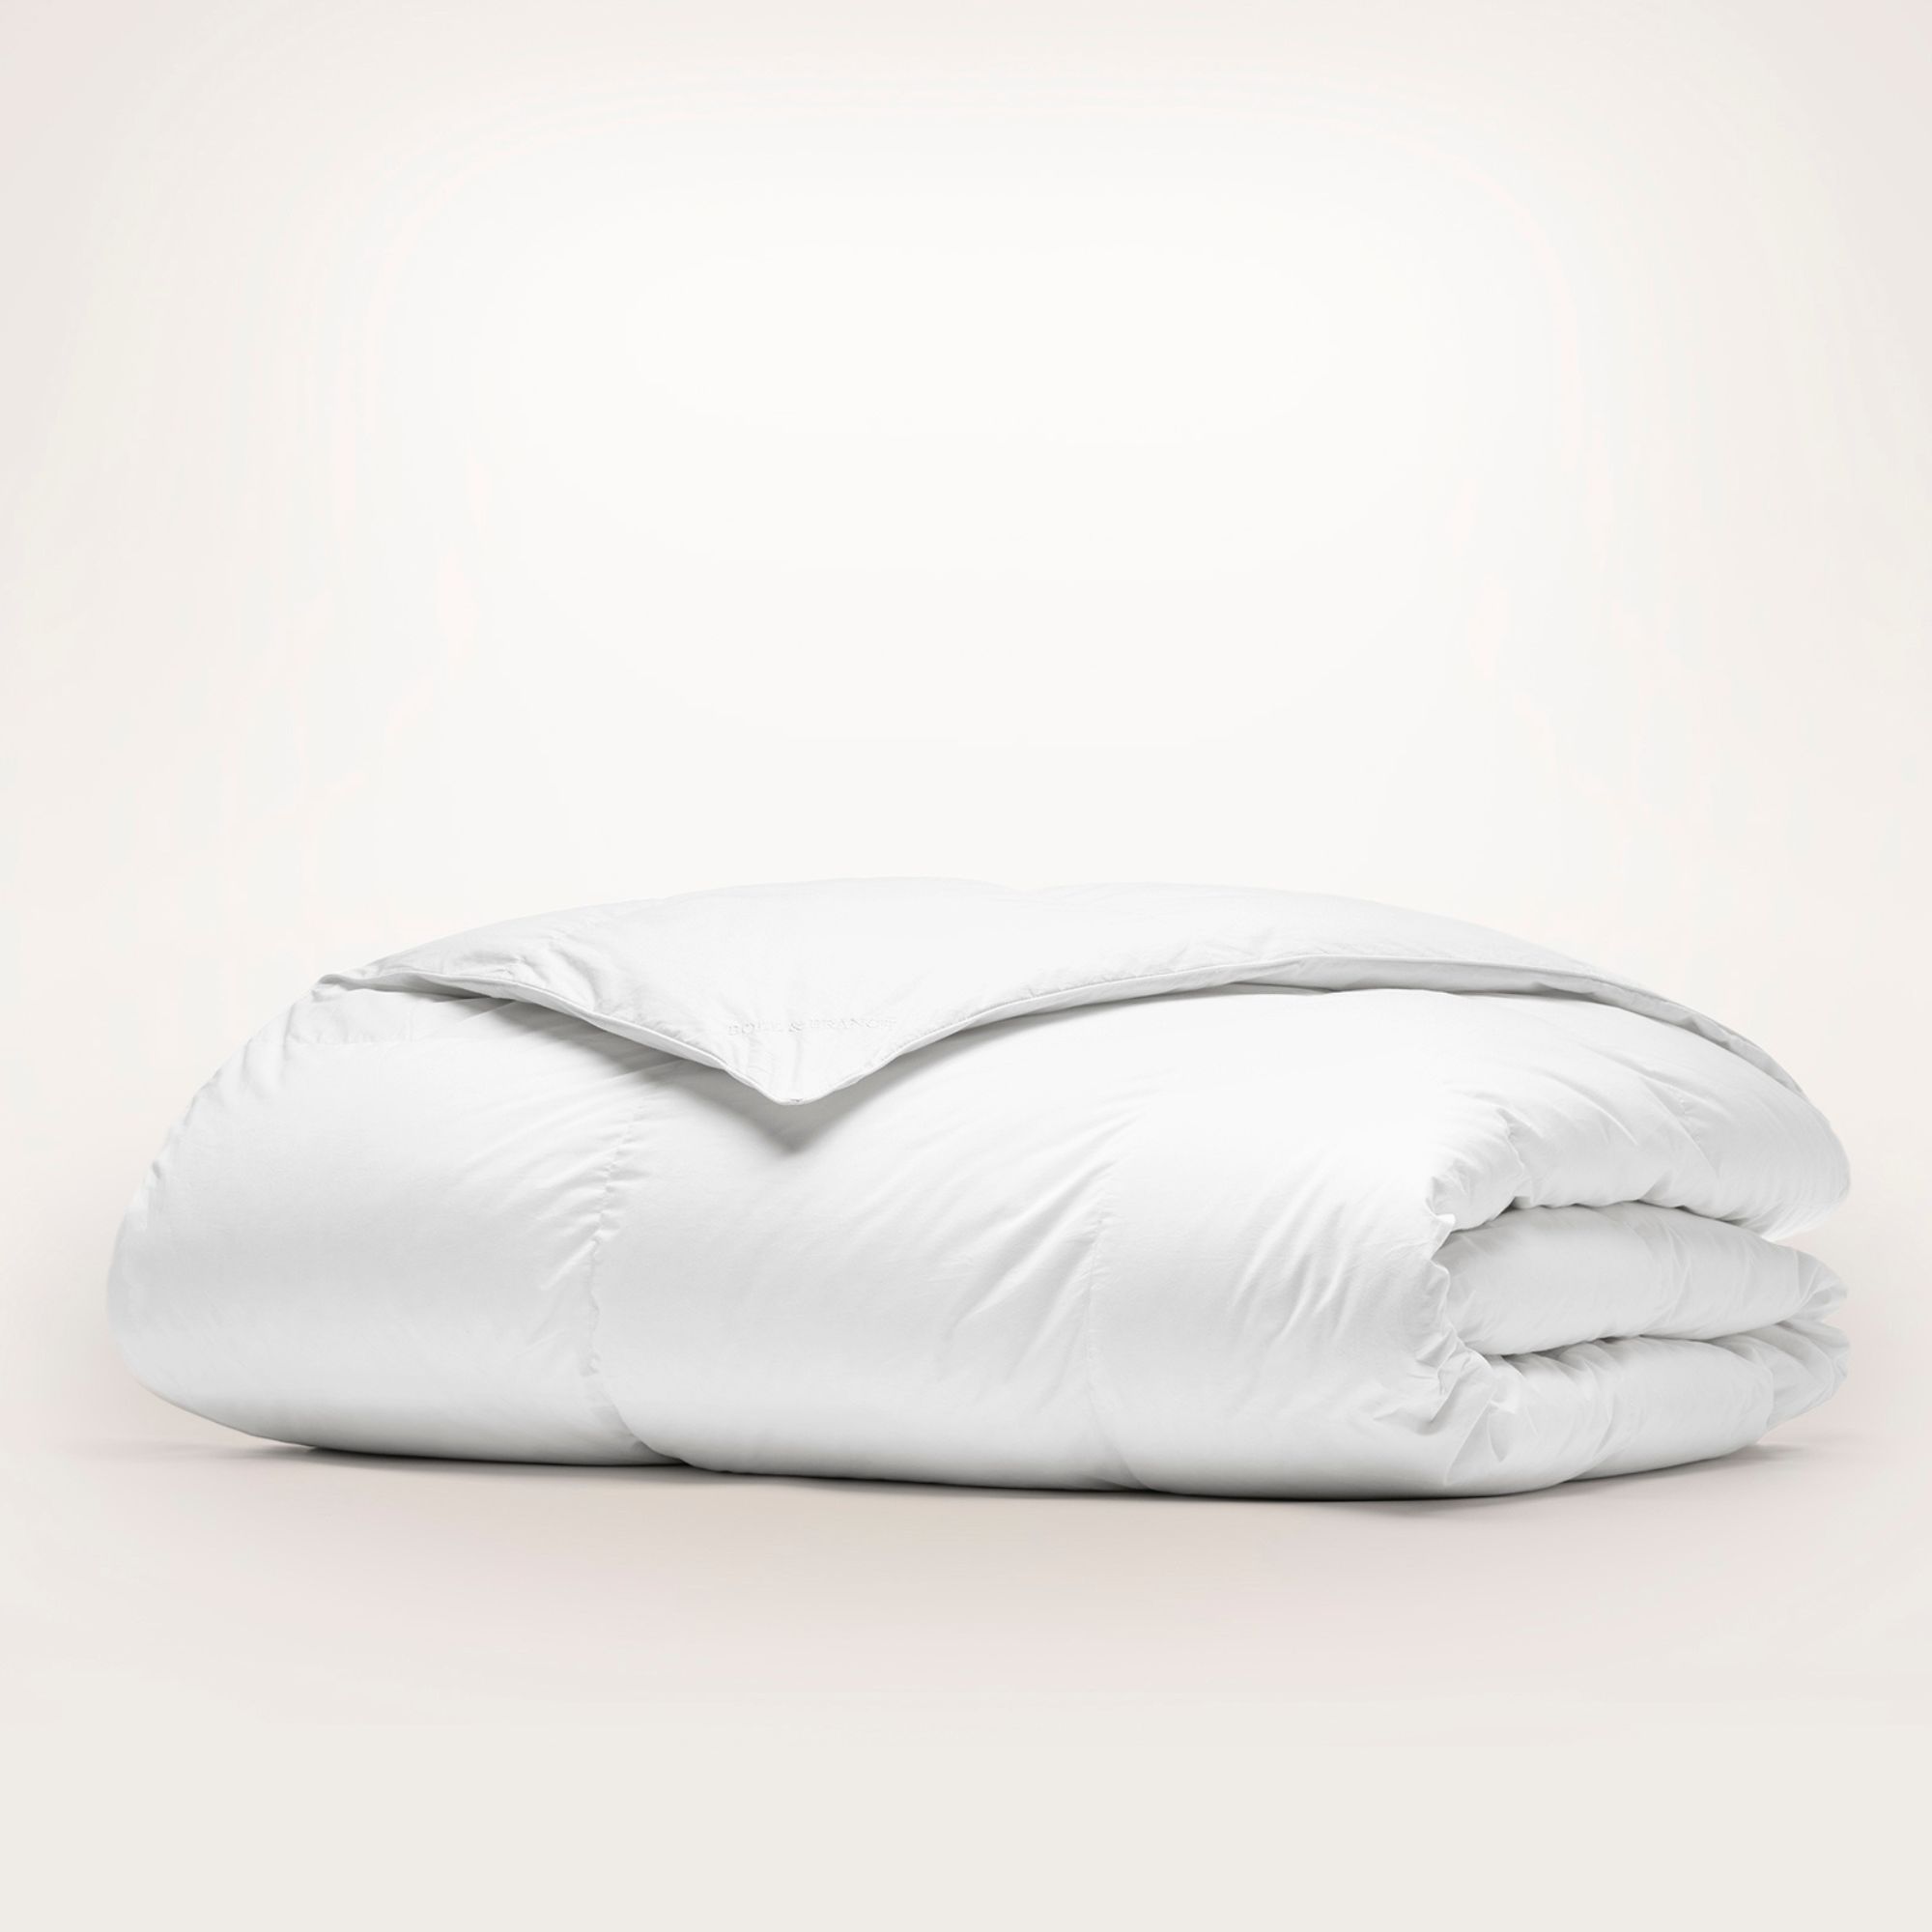 Duvet vs comforter: experts uncover which one you should buy | Homes ...